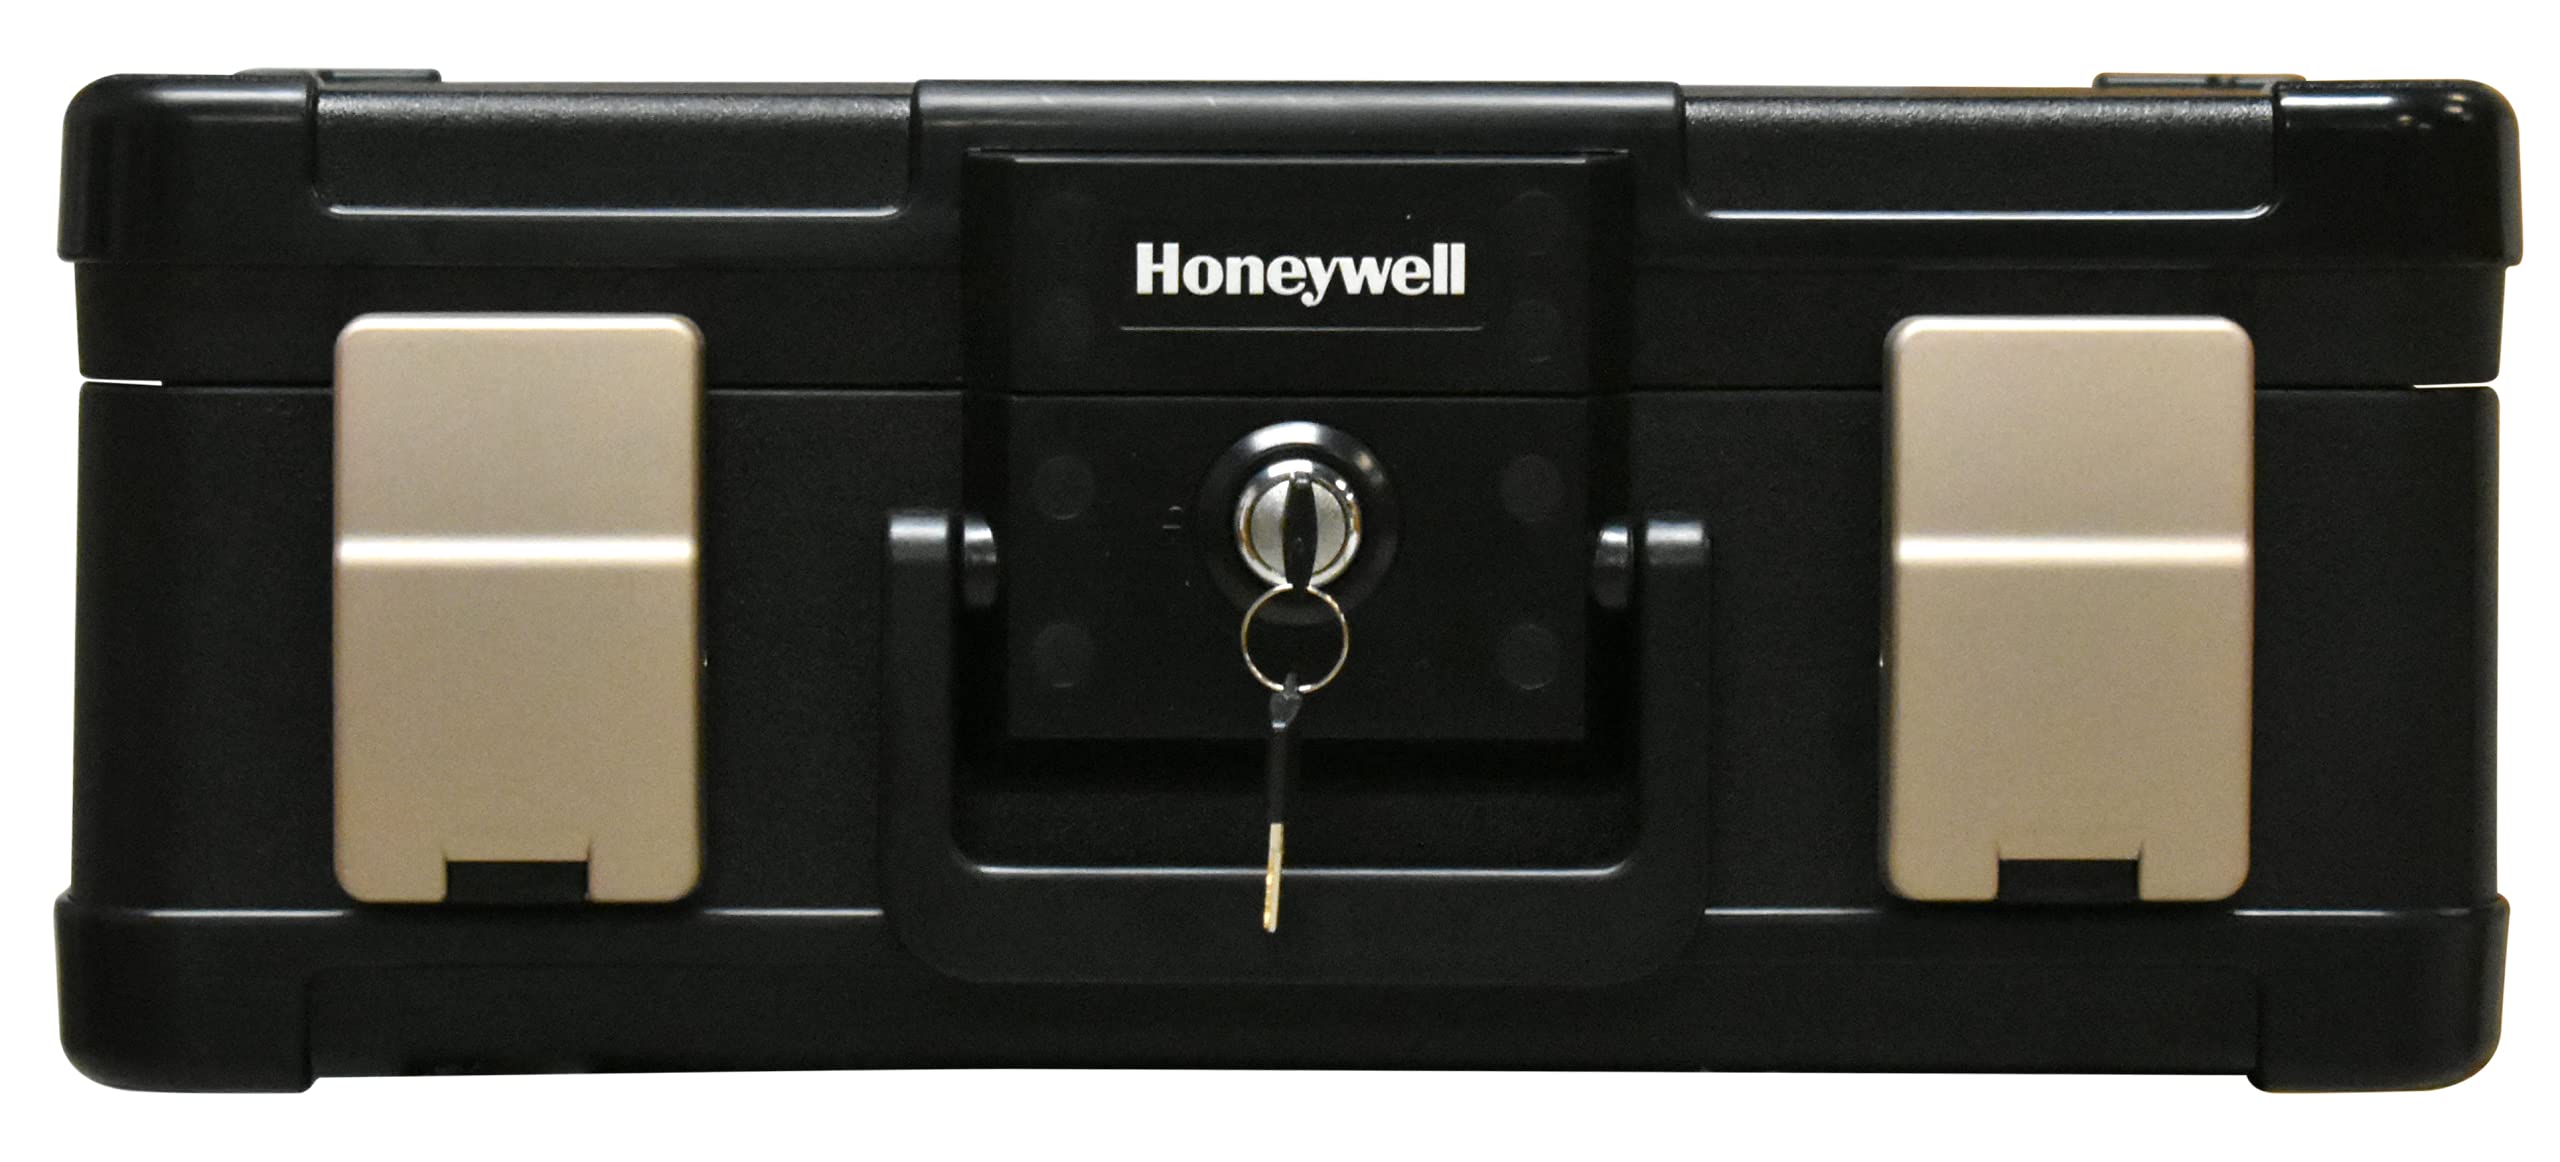 Honeywell Safes - 1103 Fire Safe & Waterproof Safe Box Chest with Carry Handle for Storing Documents in Home/Office/Safes - Medium (Black 0.27 cubic feet)